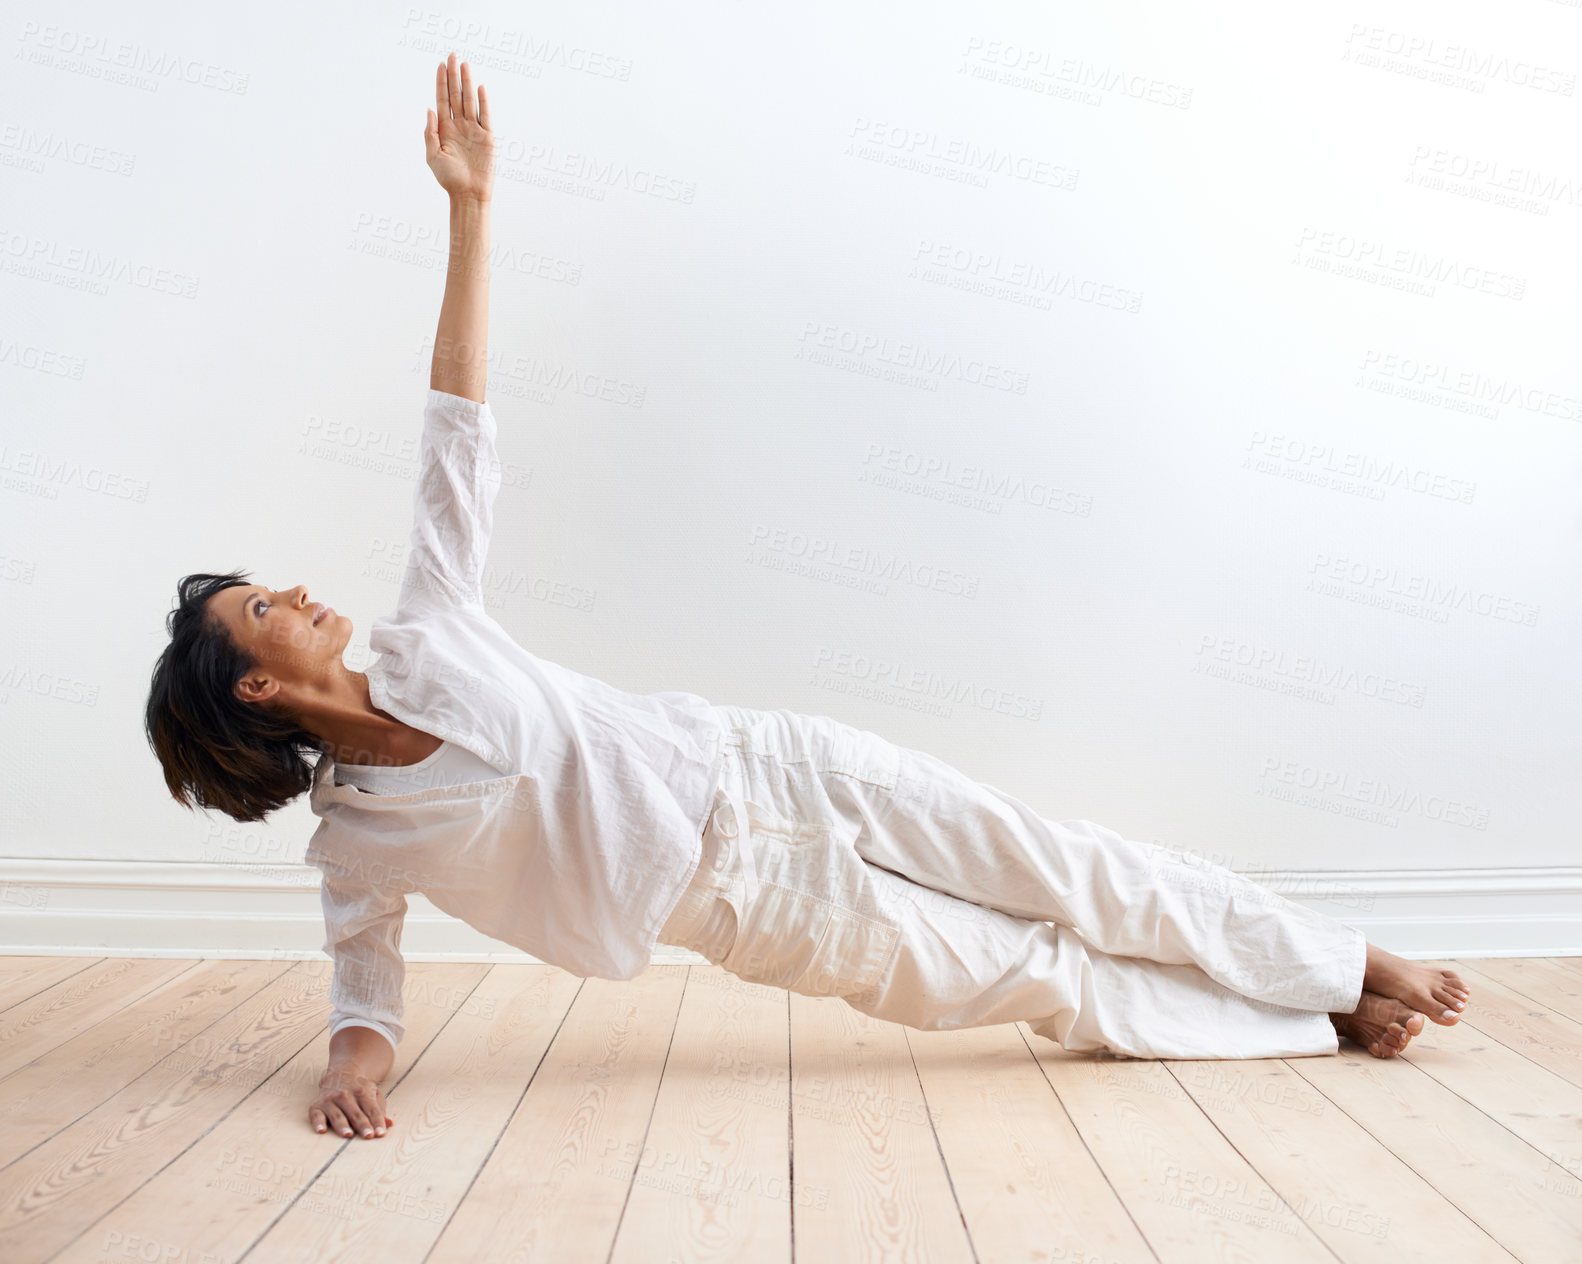 Buy stock photo A fit young woman performing the side plank pose during her yoga routine